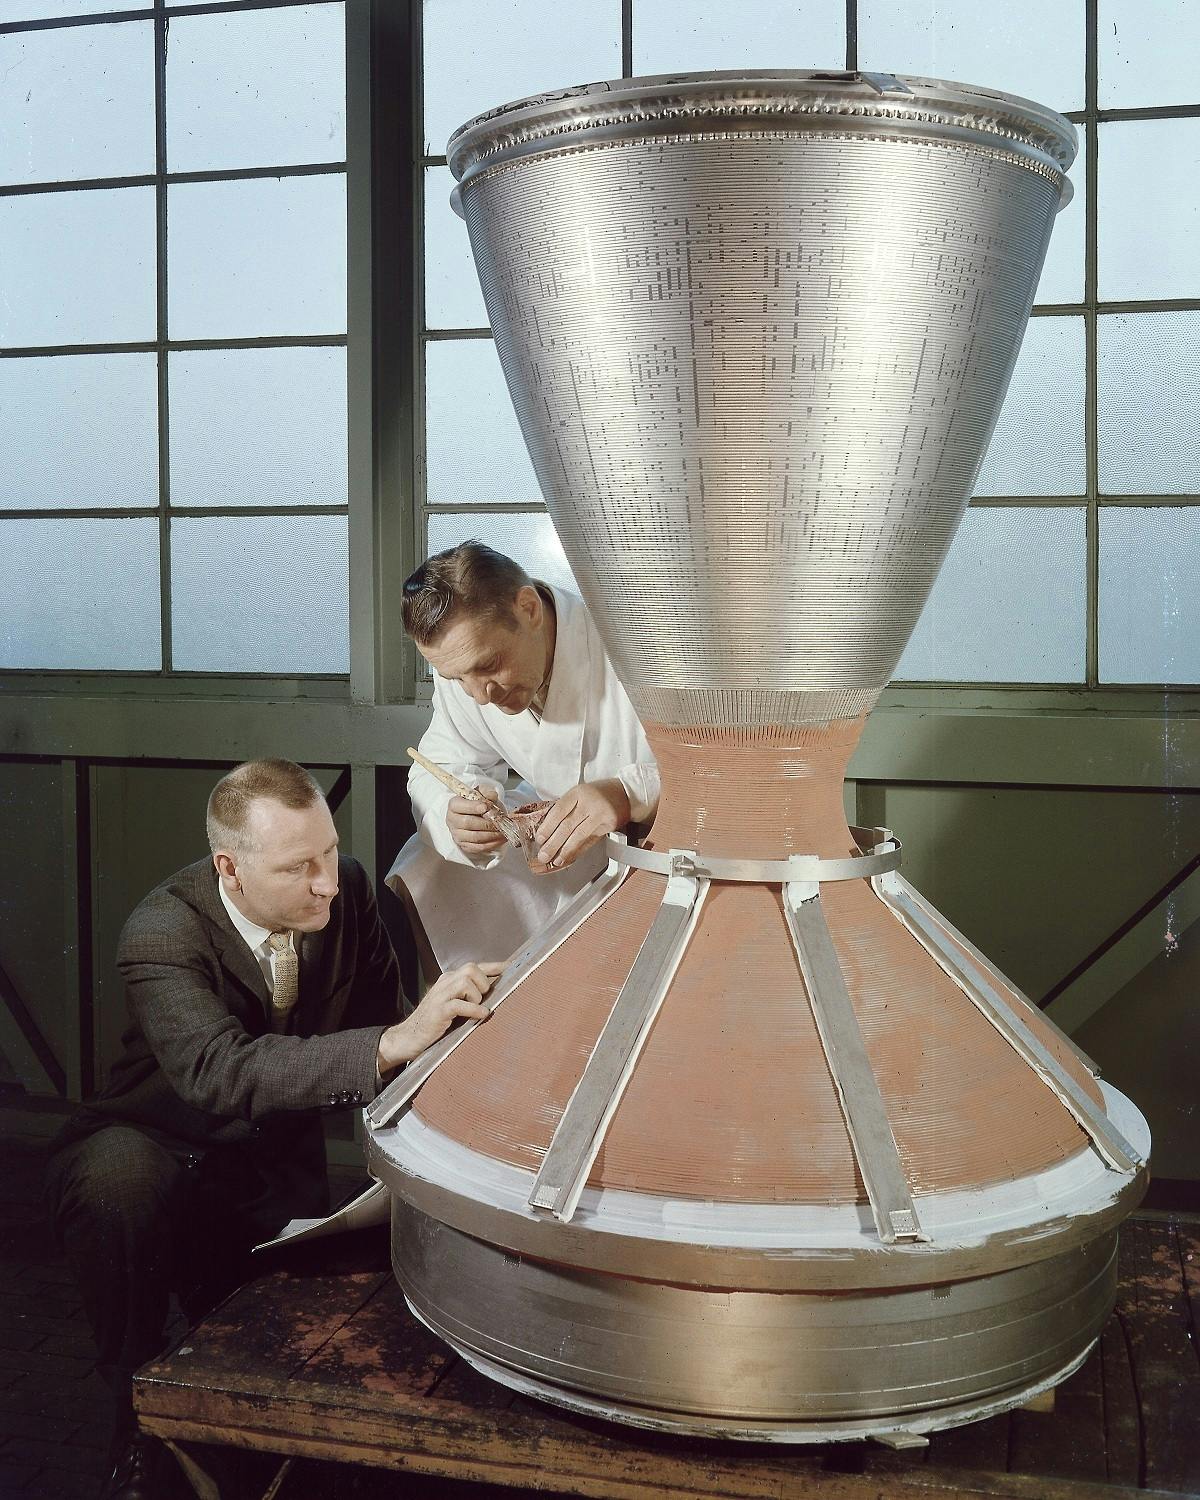 Scientist and business man inspecting a device for nuclear thermal rocketry